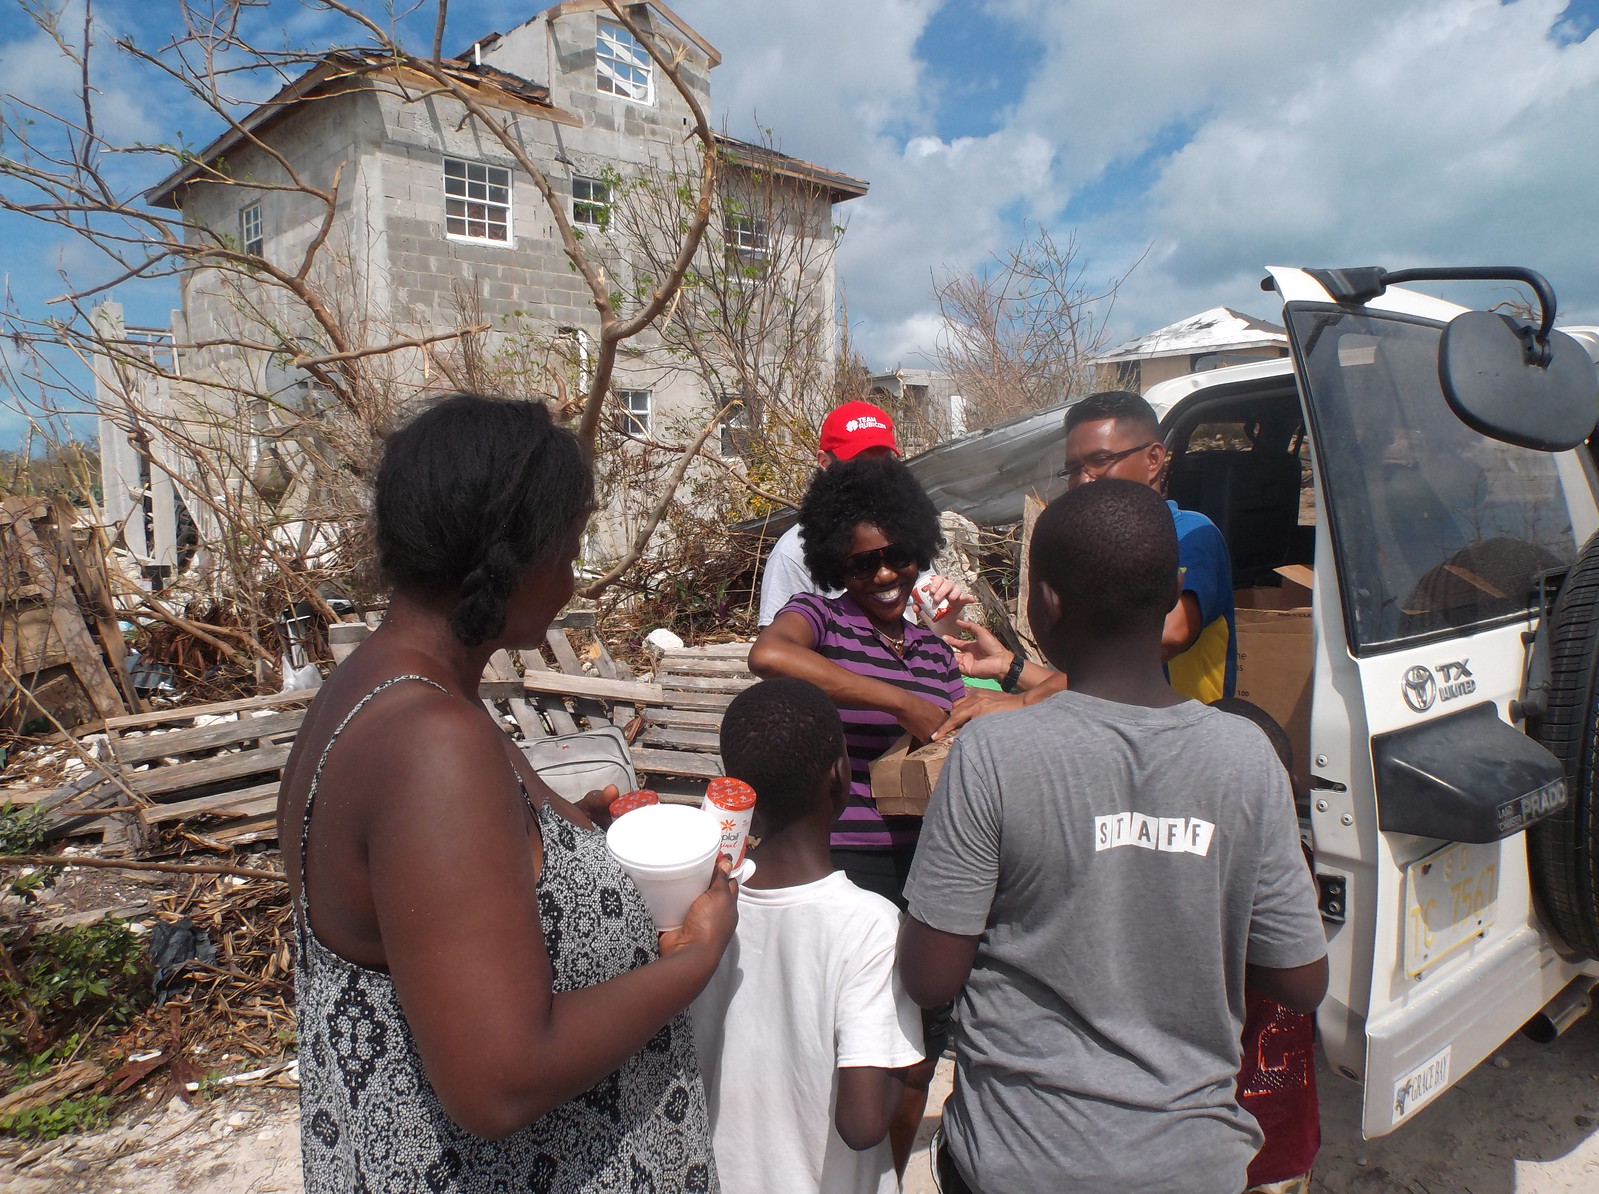 The Salvation Army responds to Hurricane Maria damage in the Turks and Caicos Islands